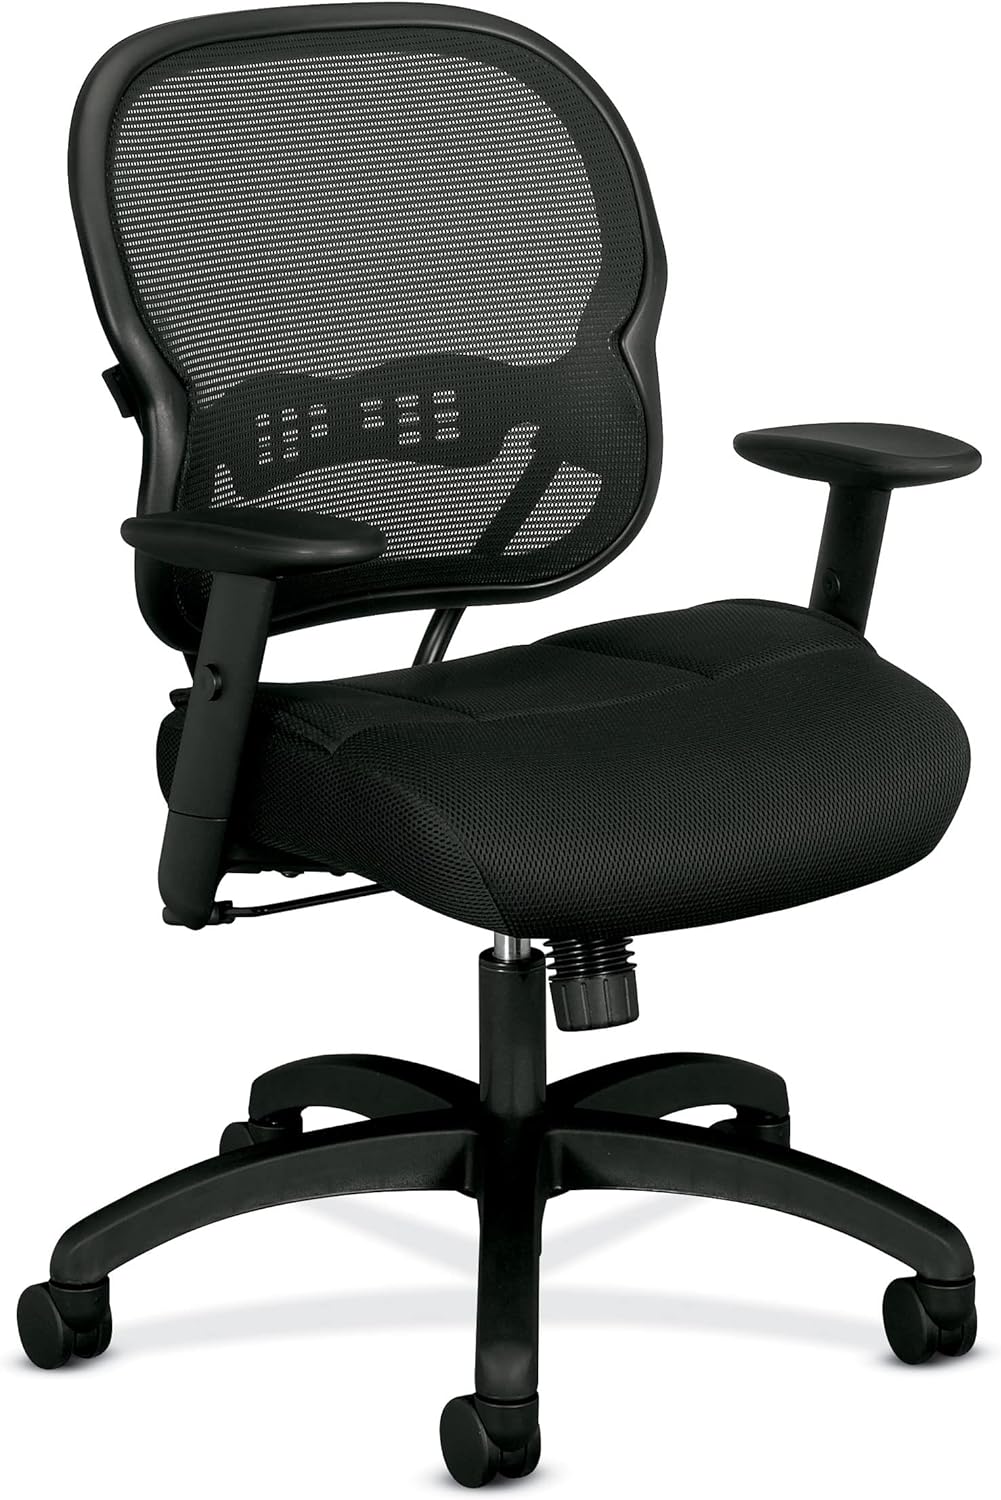 HON Wave Office Chair Mid Back Mesh Ergonomic Computer Desk Chair - Adjustable Arms, Lumbar Support, Synchro-Tilt Tension Angle Lock Recline, Comfortable Cushion, 360 Swivel Rolling Wheels - Black